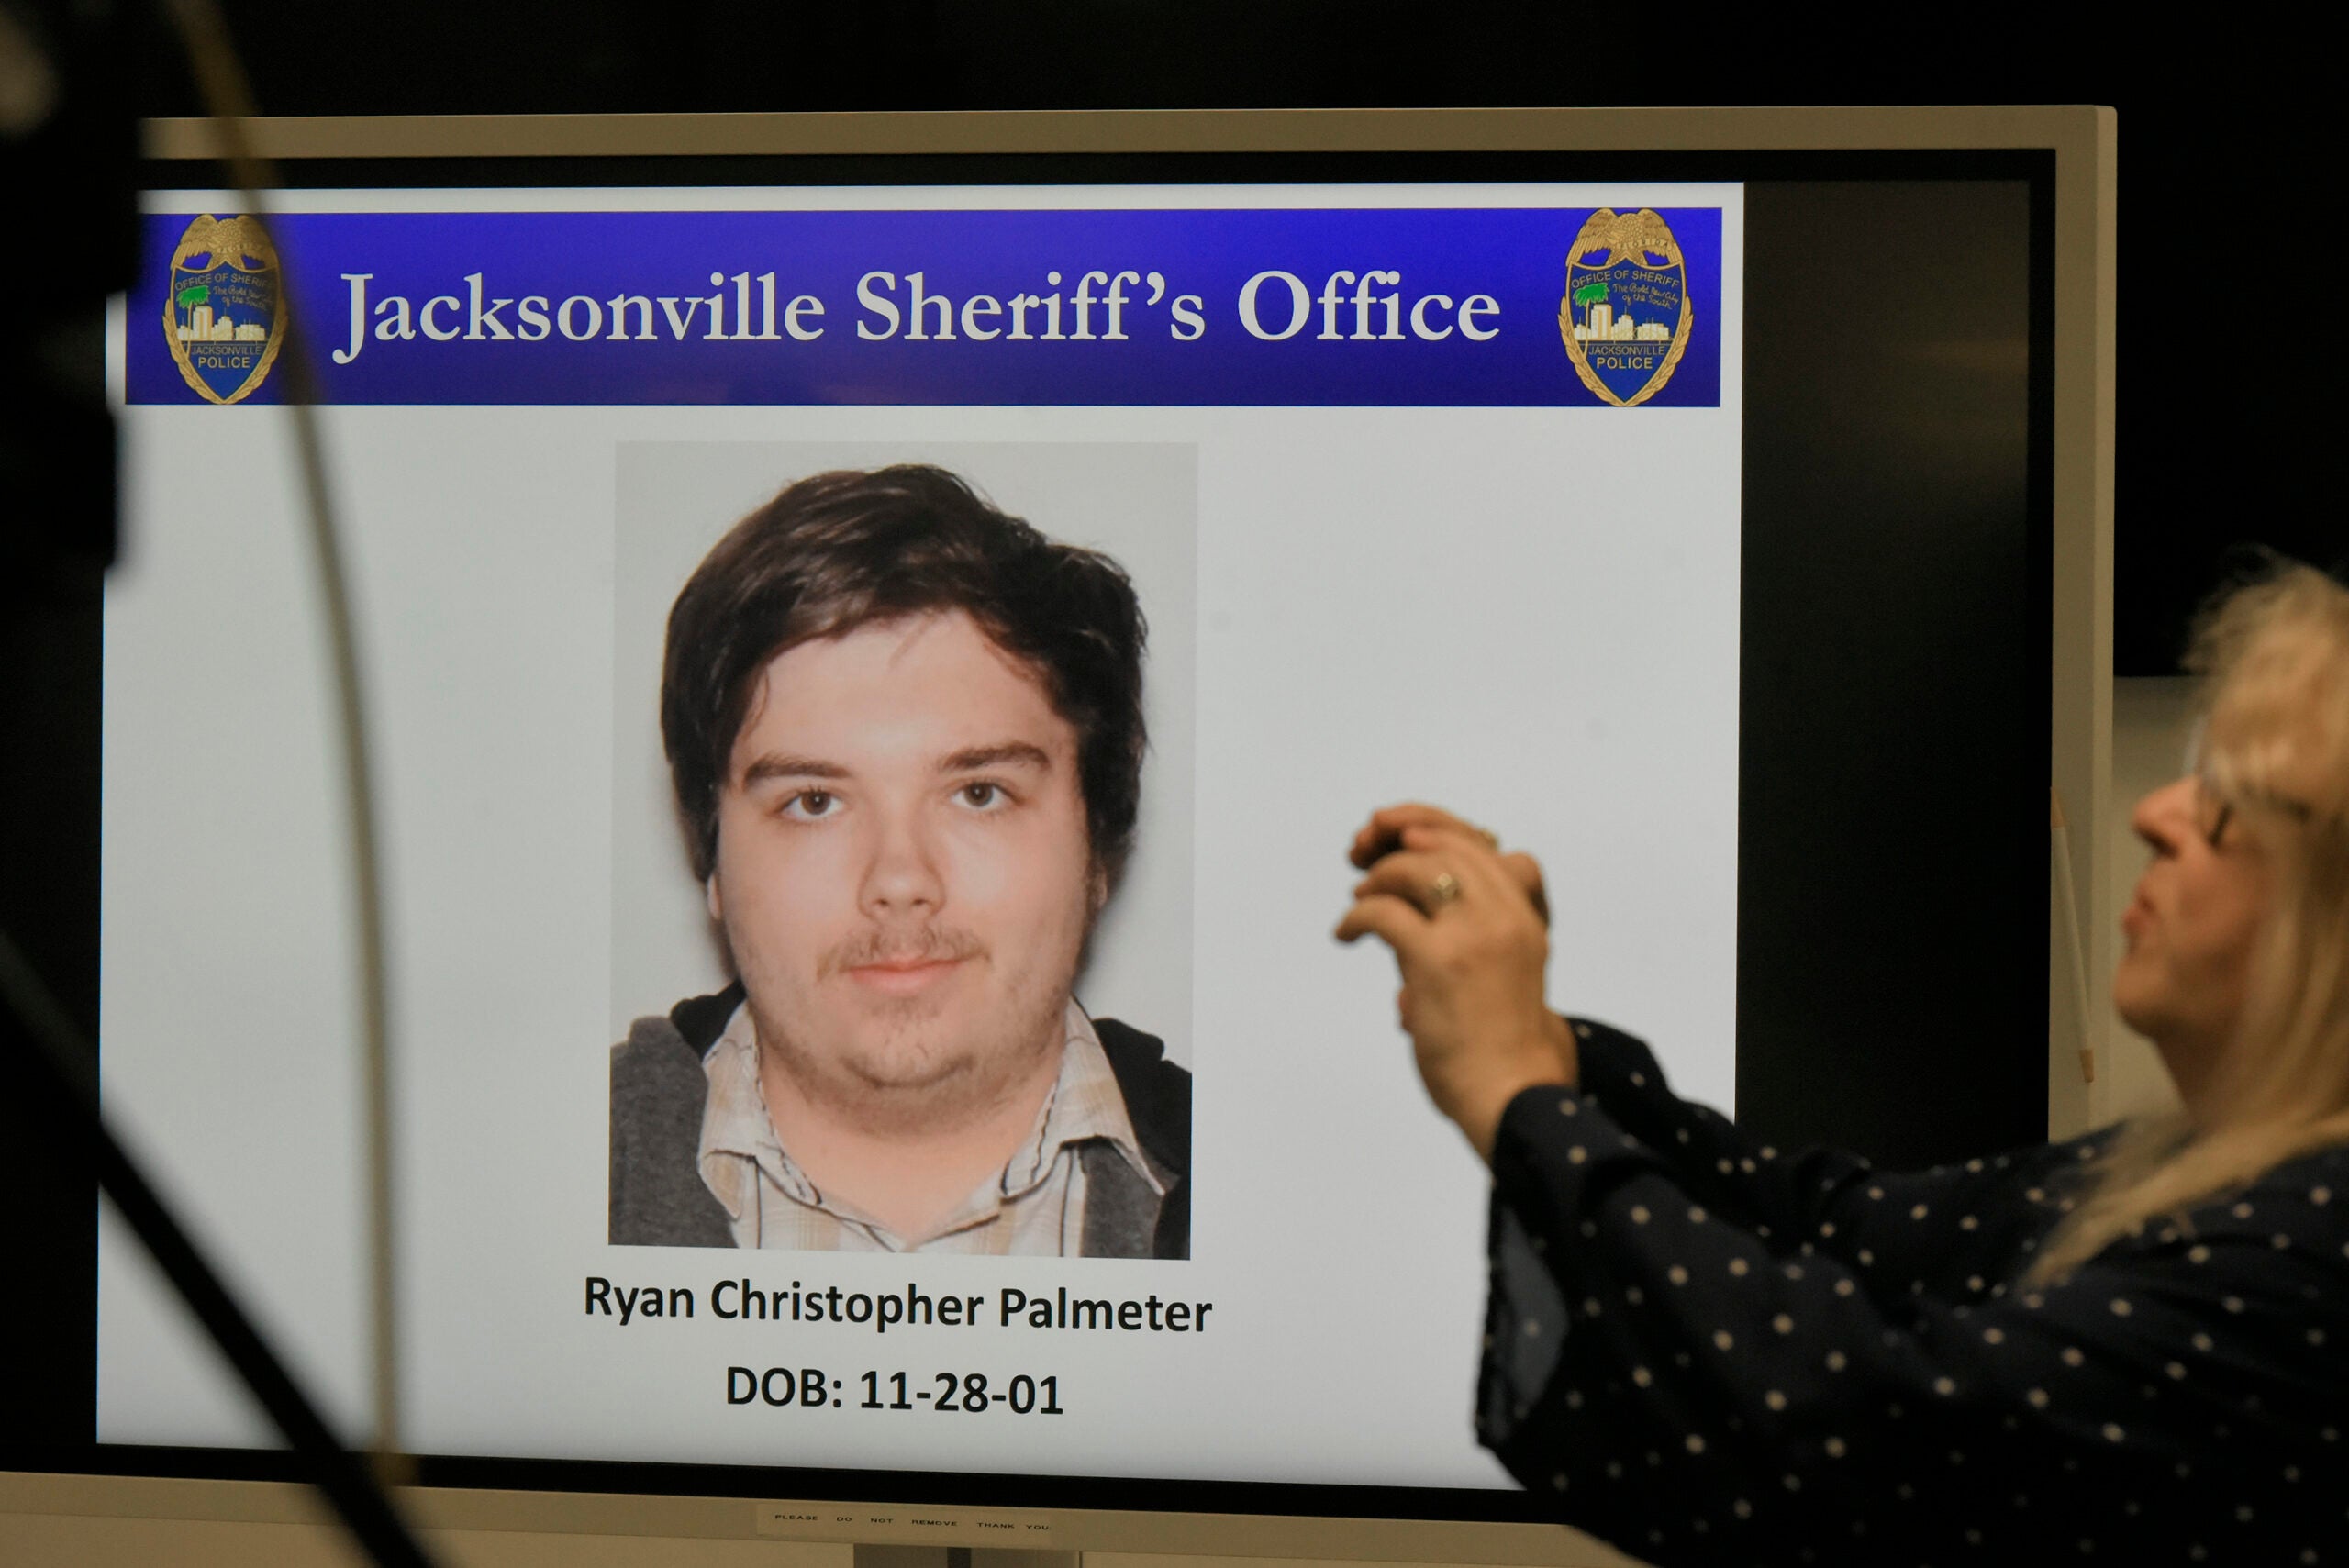 A photograph of shooter Ryan Christopher Palmeter is shown on a video monitor.